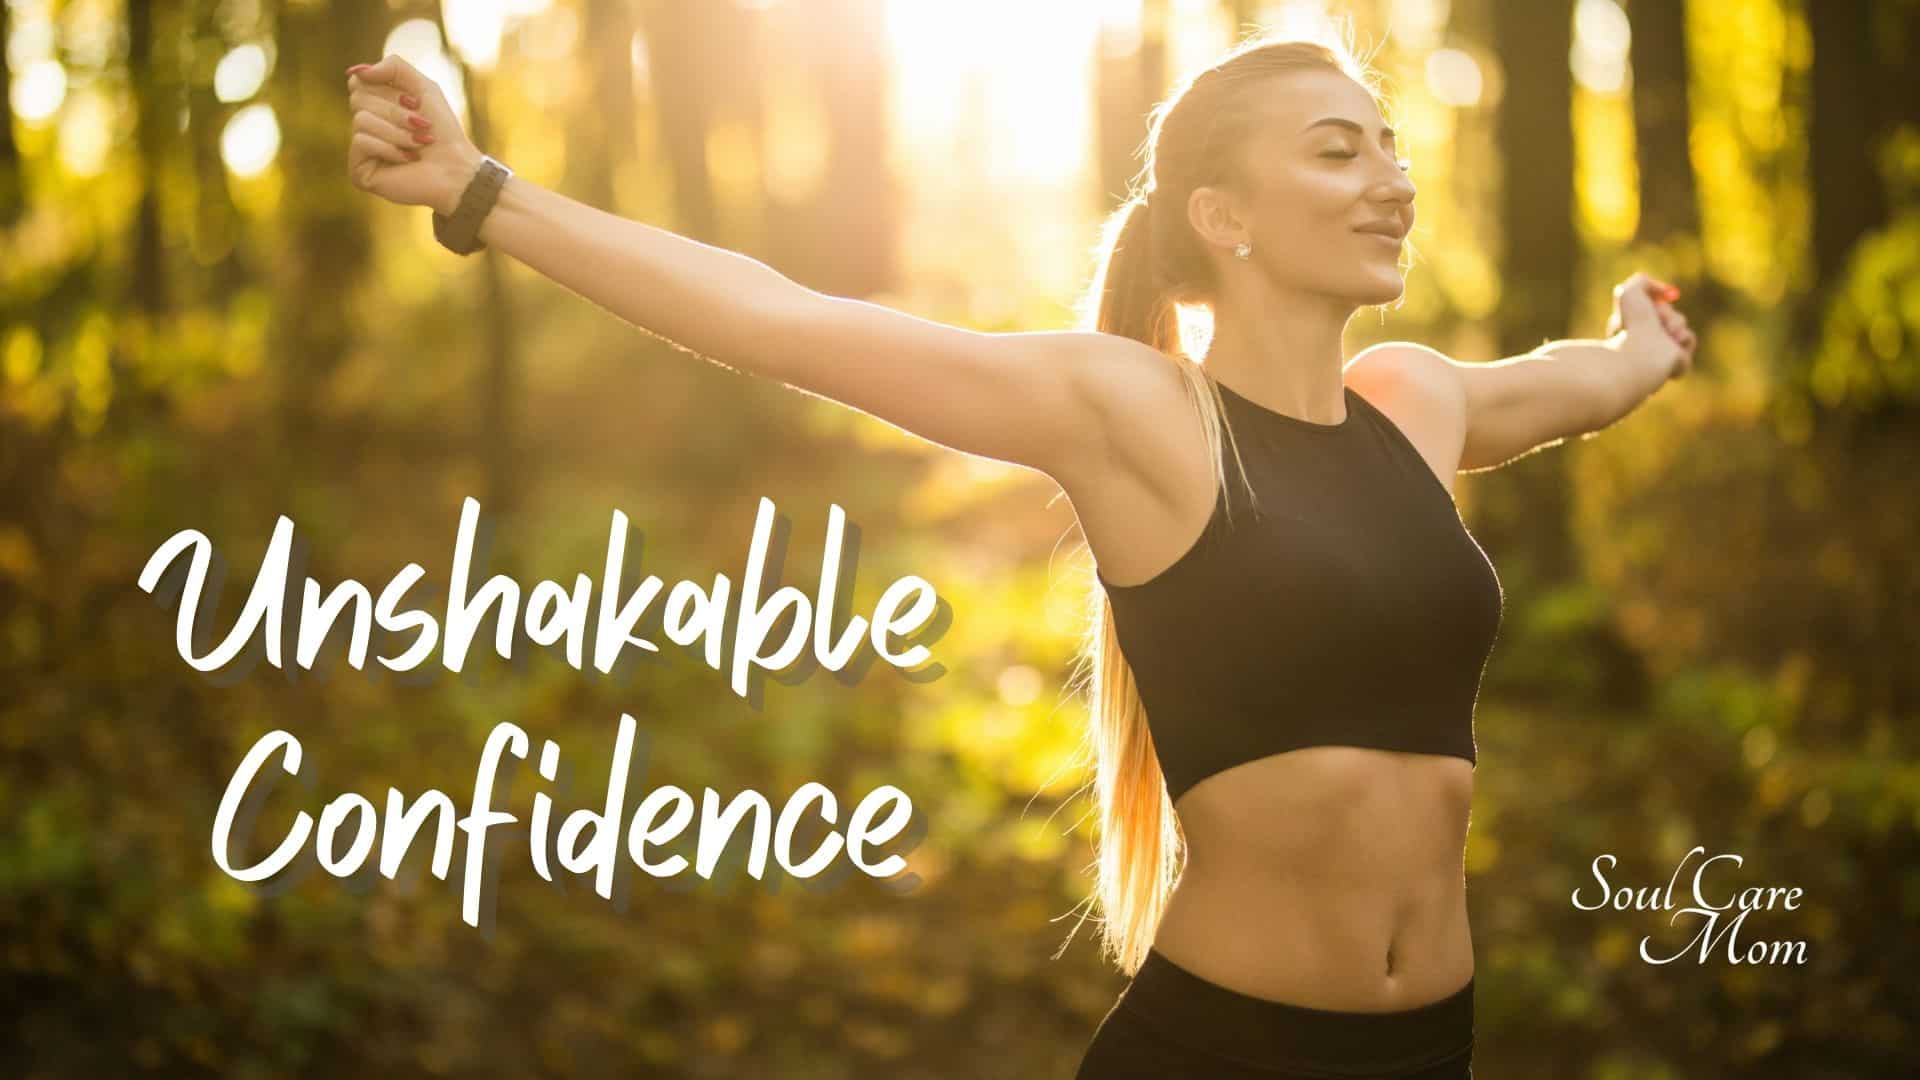 Woman with Unshakable Confidence - Soul Care Mom Course